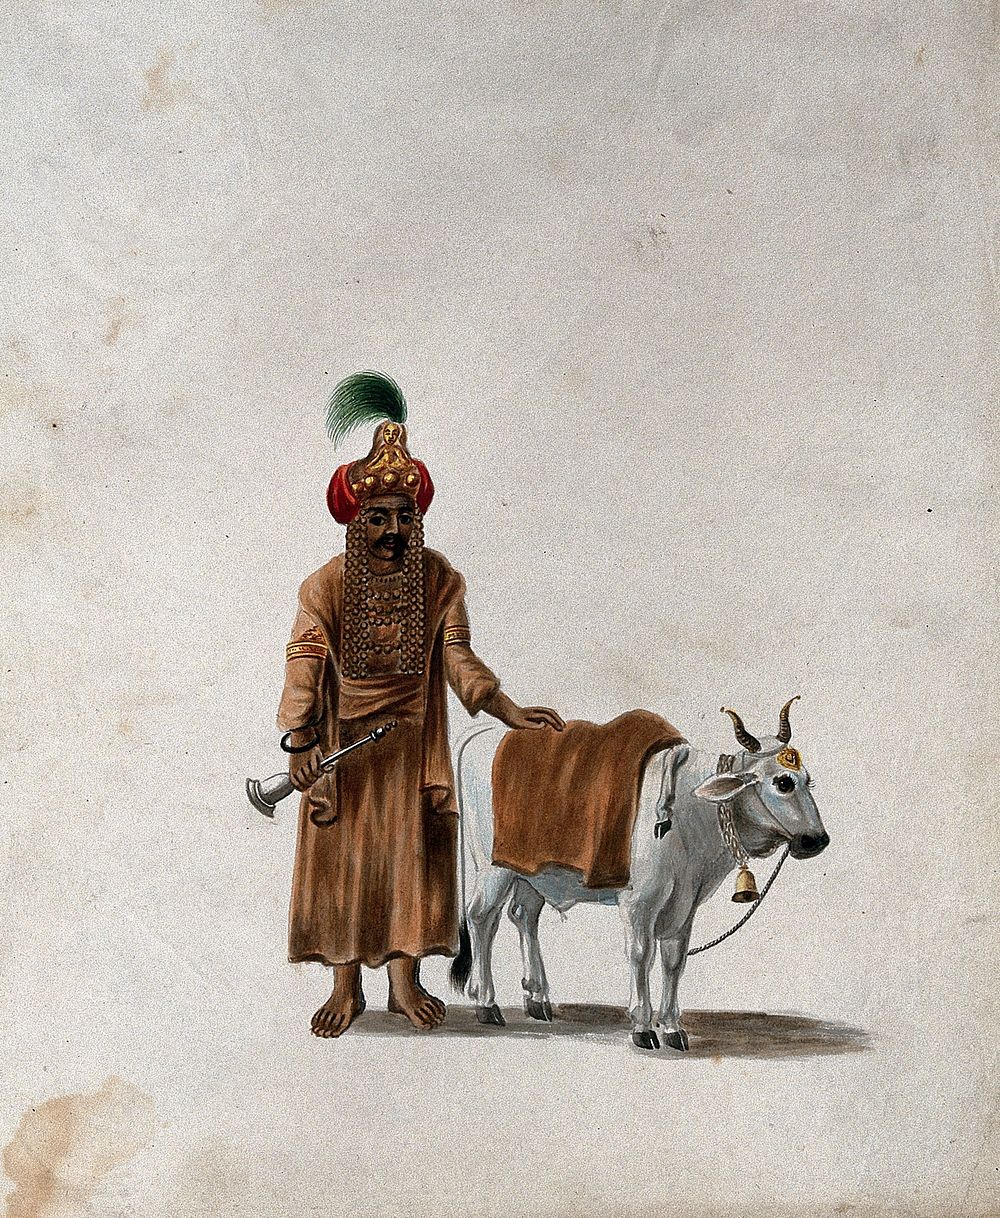 A man wearing a headgear with an image of a deity , standing with his cow. Gouache painting by an Indian artist.